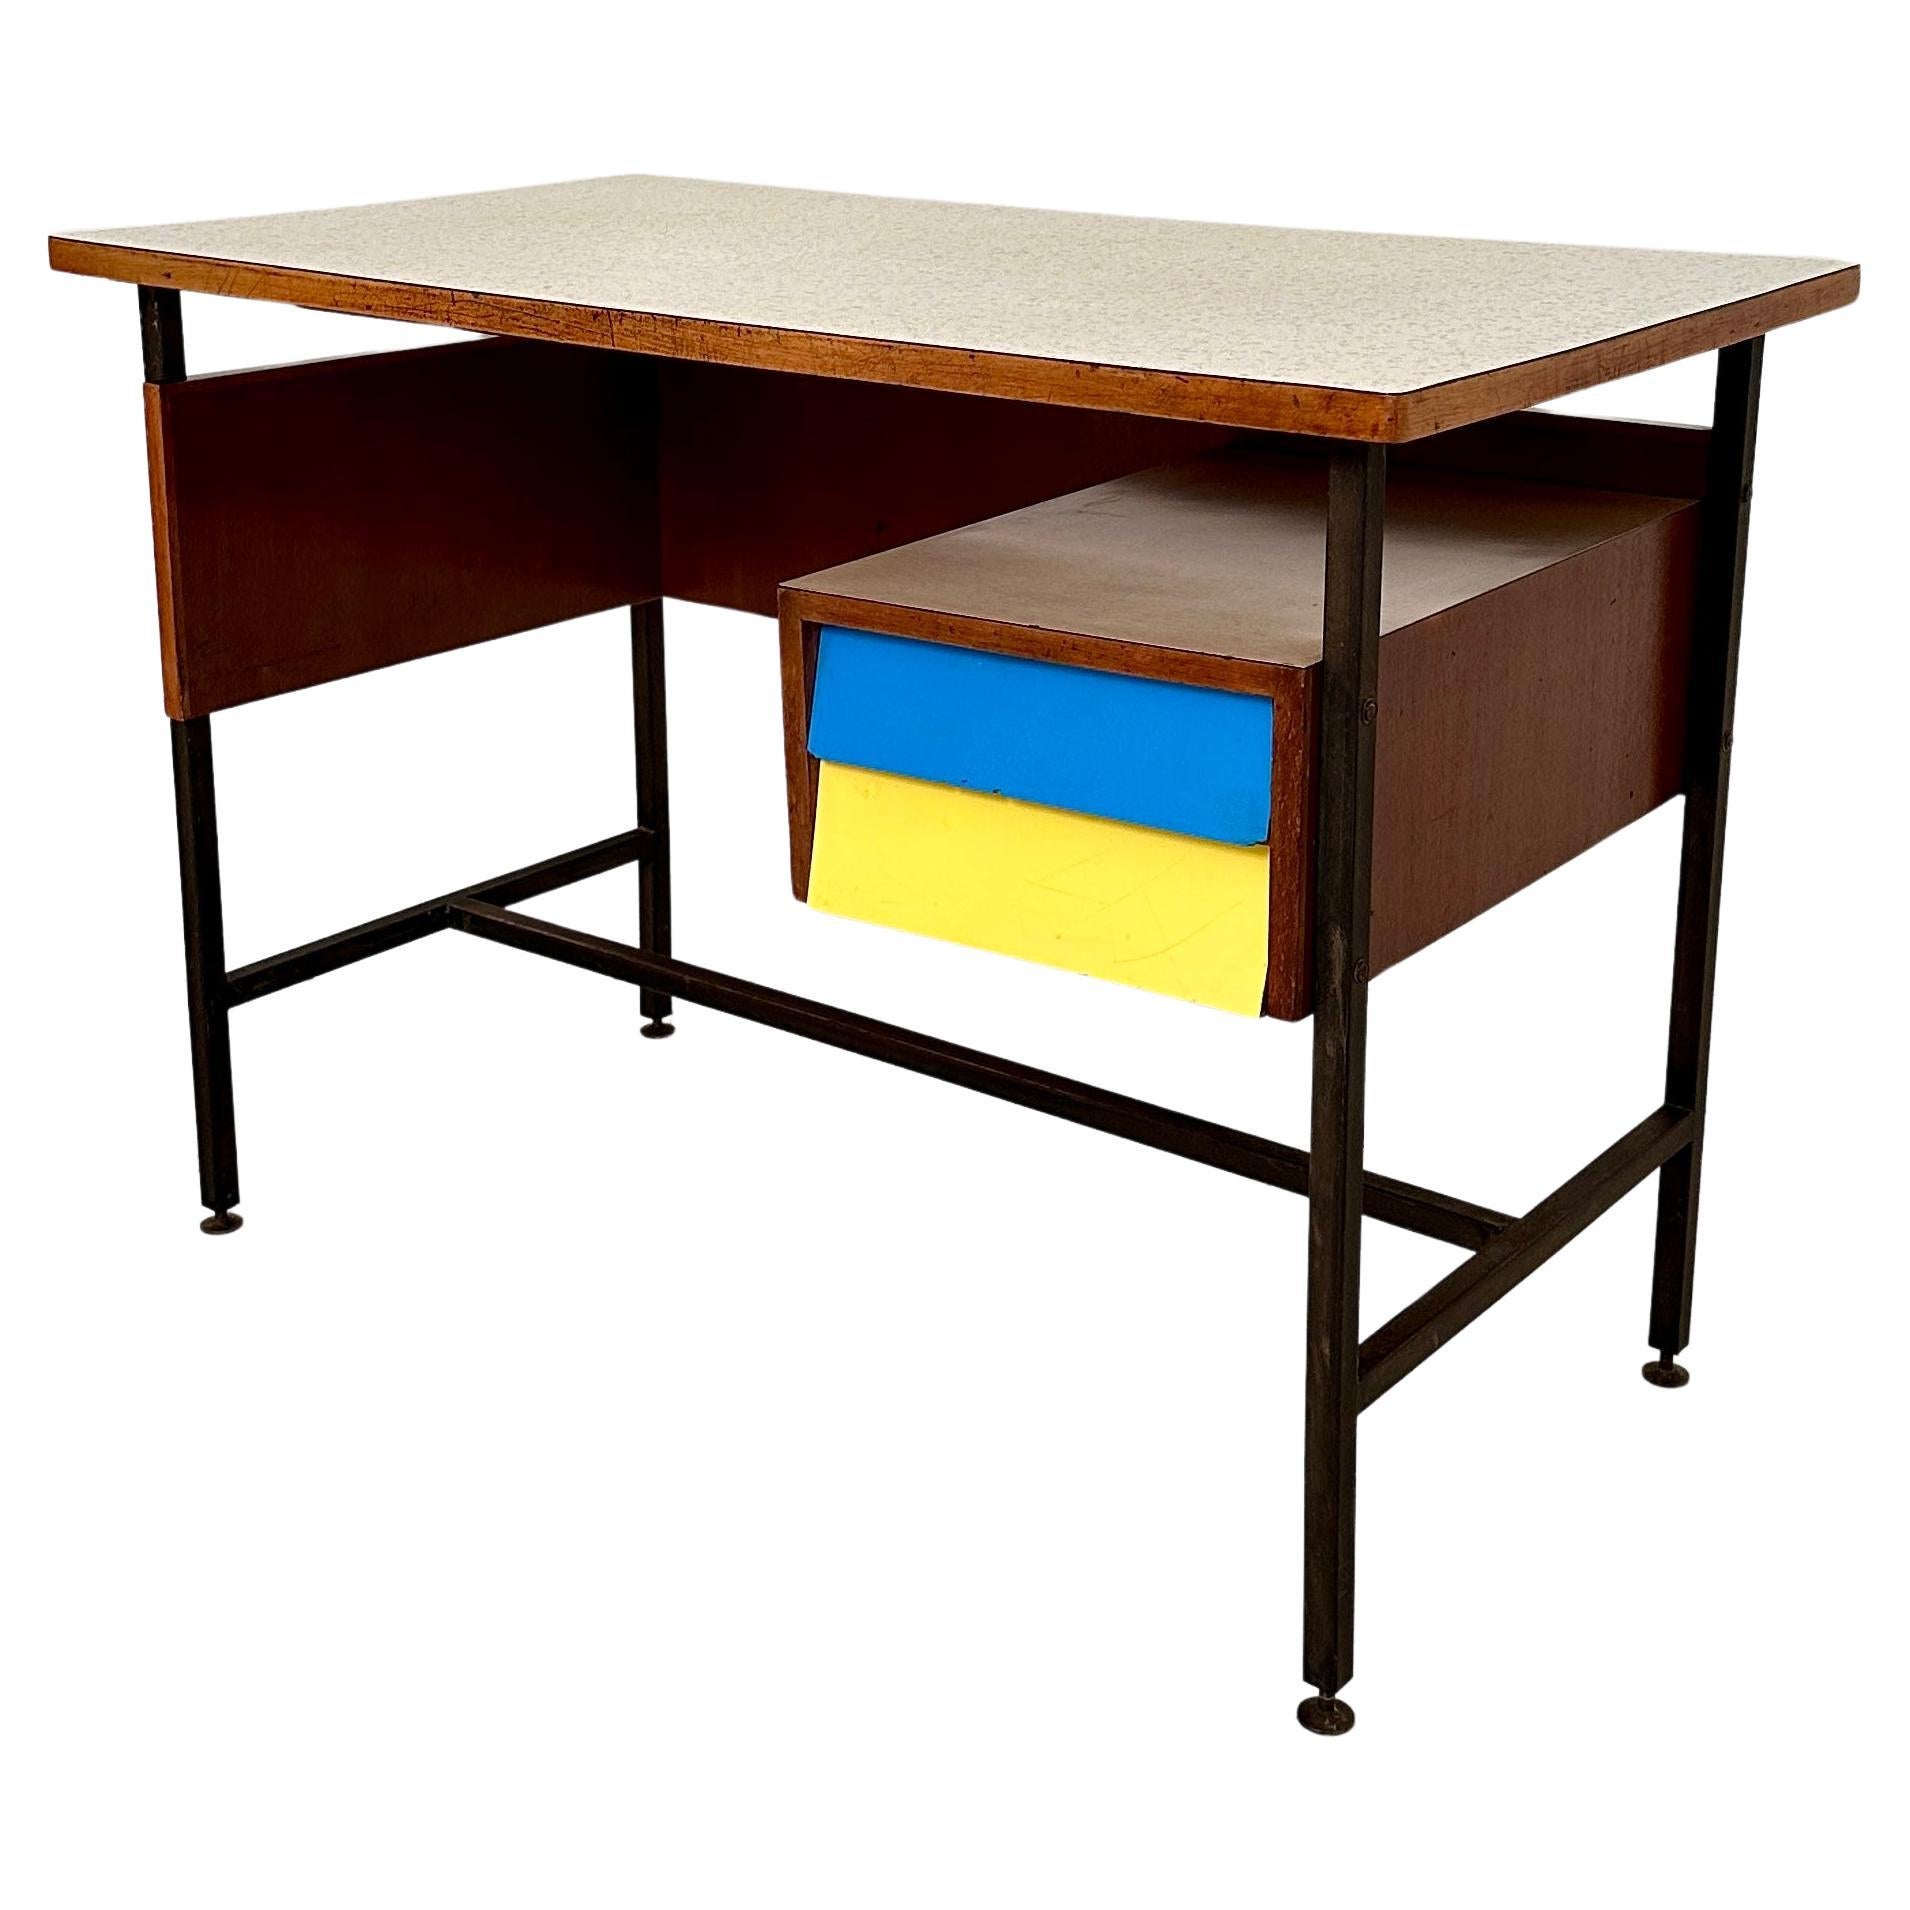 Small Mid Century Italian Desk in Metal, Walnut and Formica, around 1950